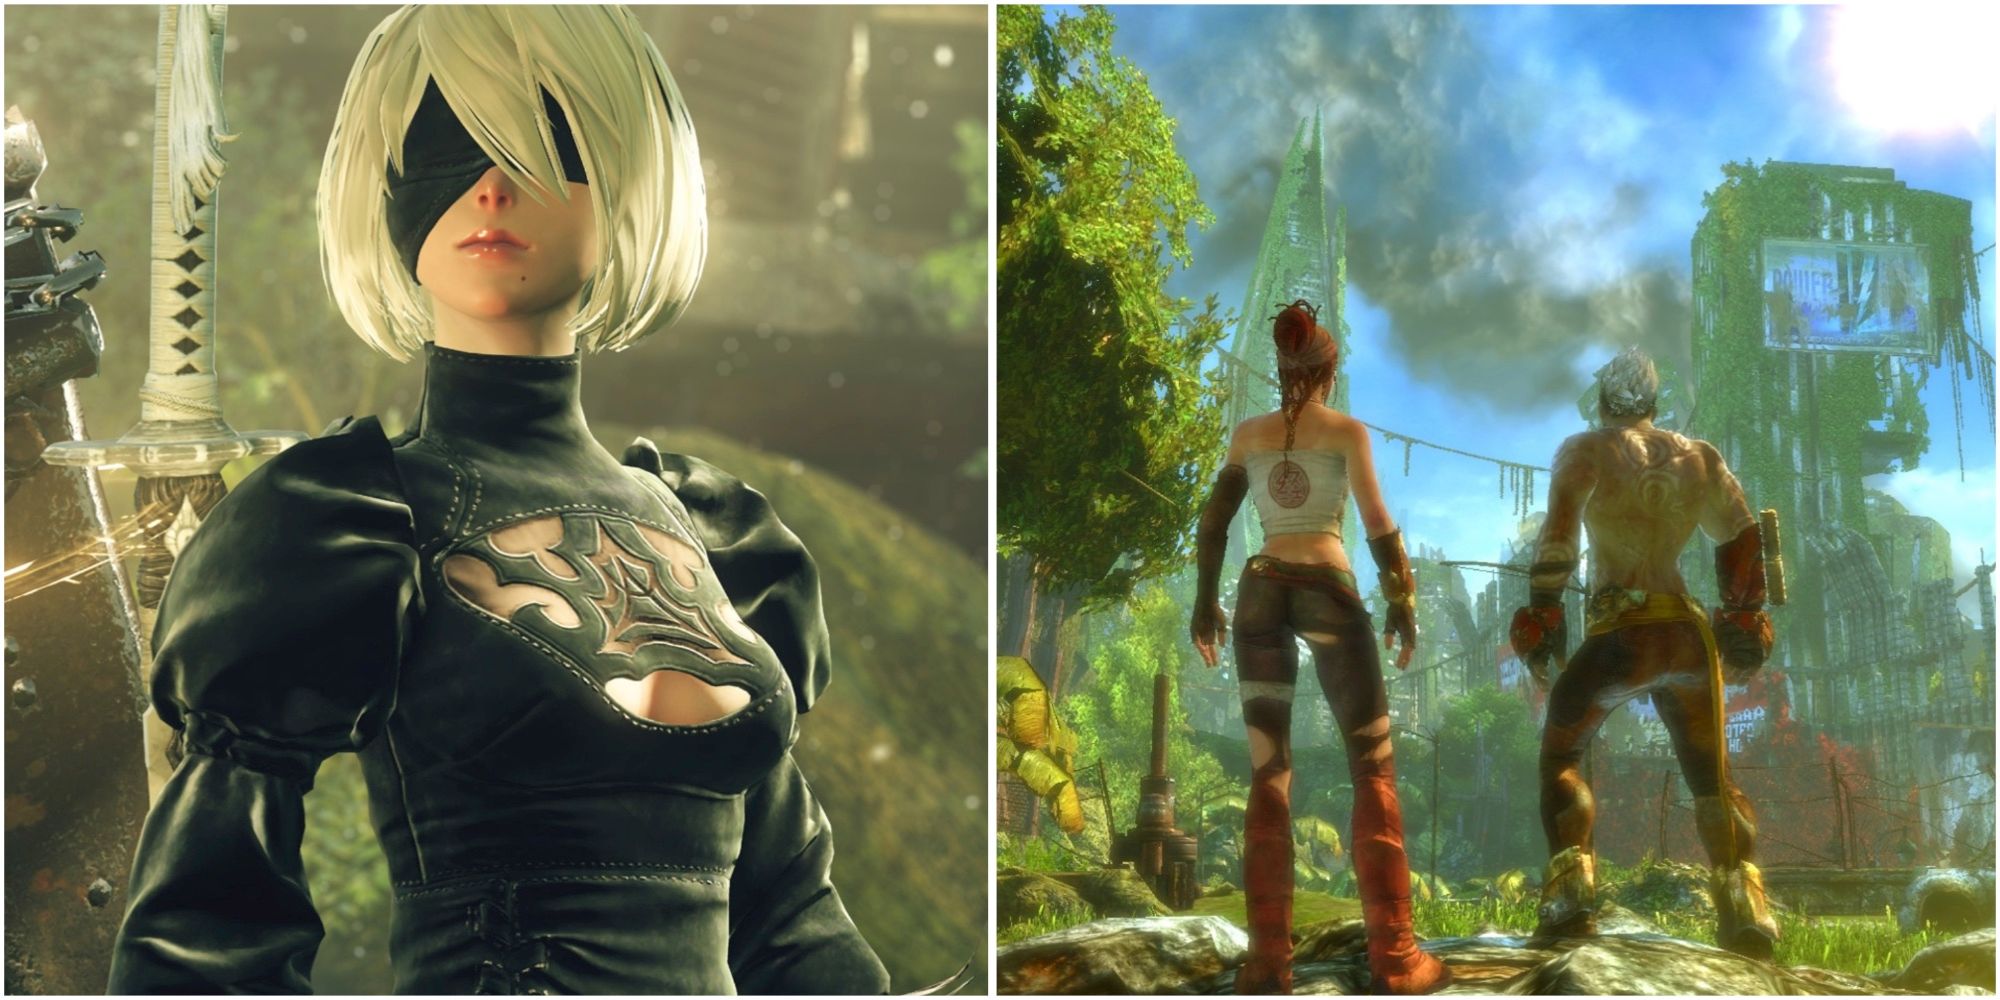 2b in NieR Automata and Trip and Monkey exploring the world in Enslaved Odyssey To The West